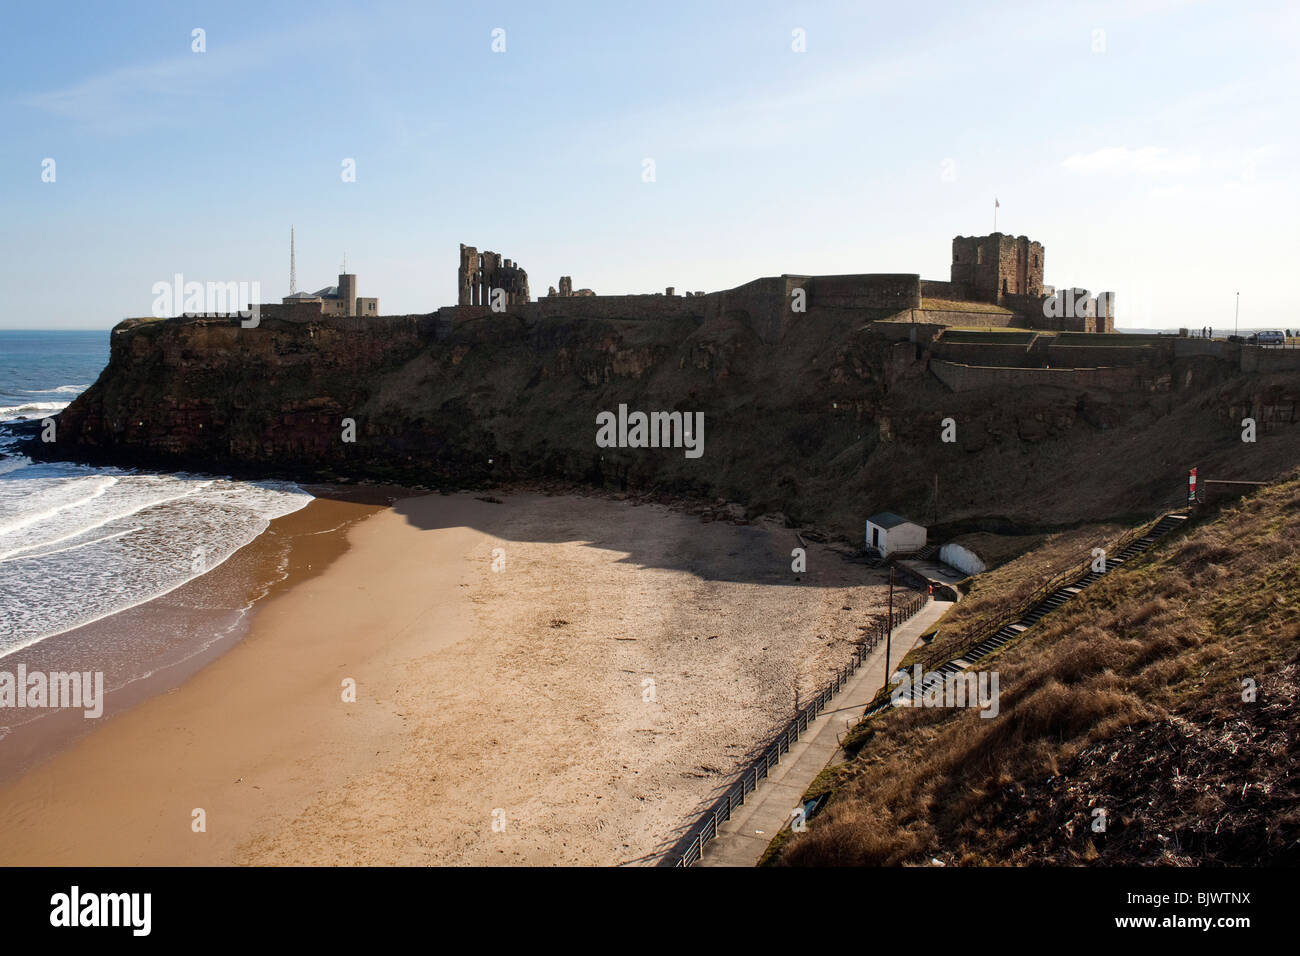 Tynemouth Priory castle overlooking the beach at King Edwards bay' Tynemouth, on the North East coast of England Stock Photo